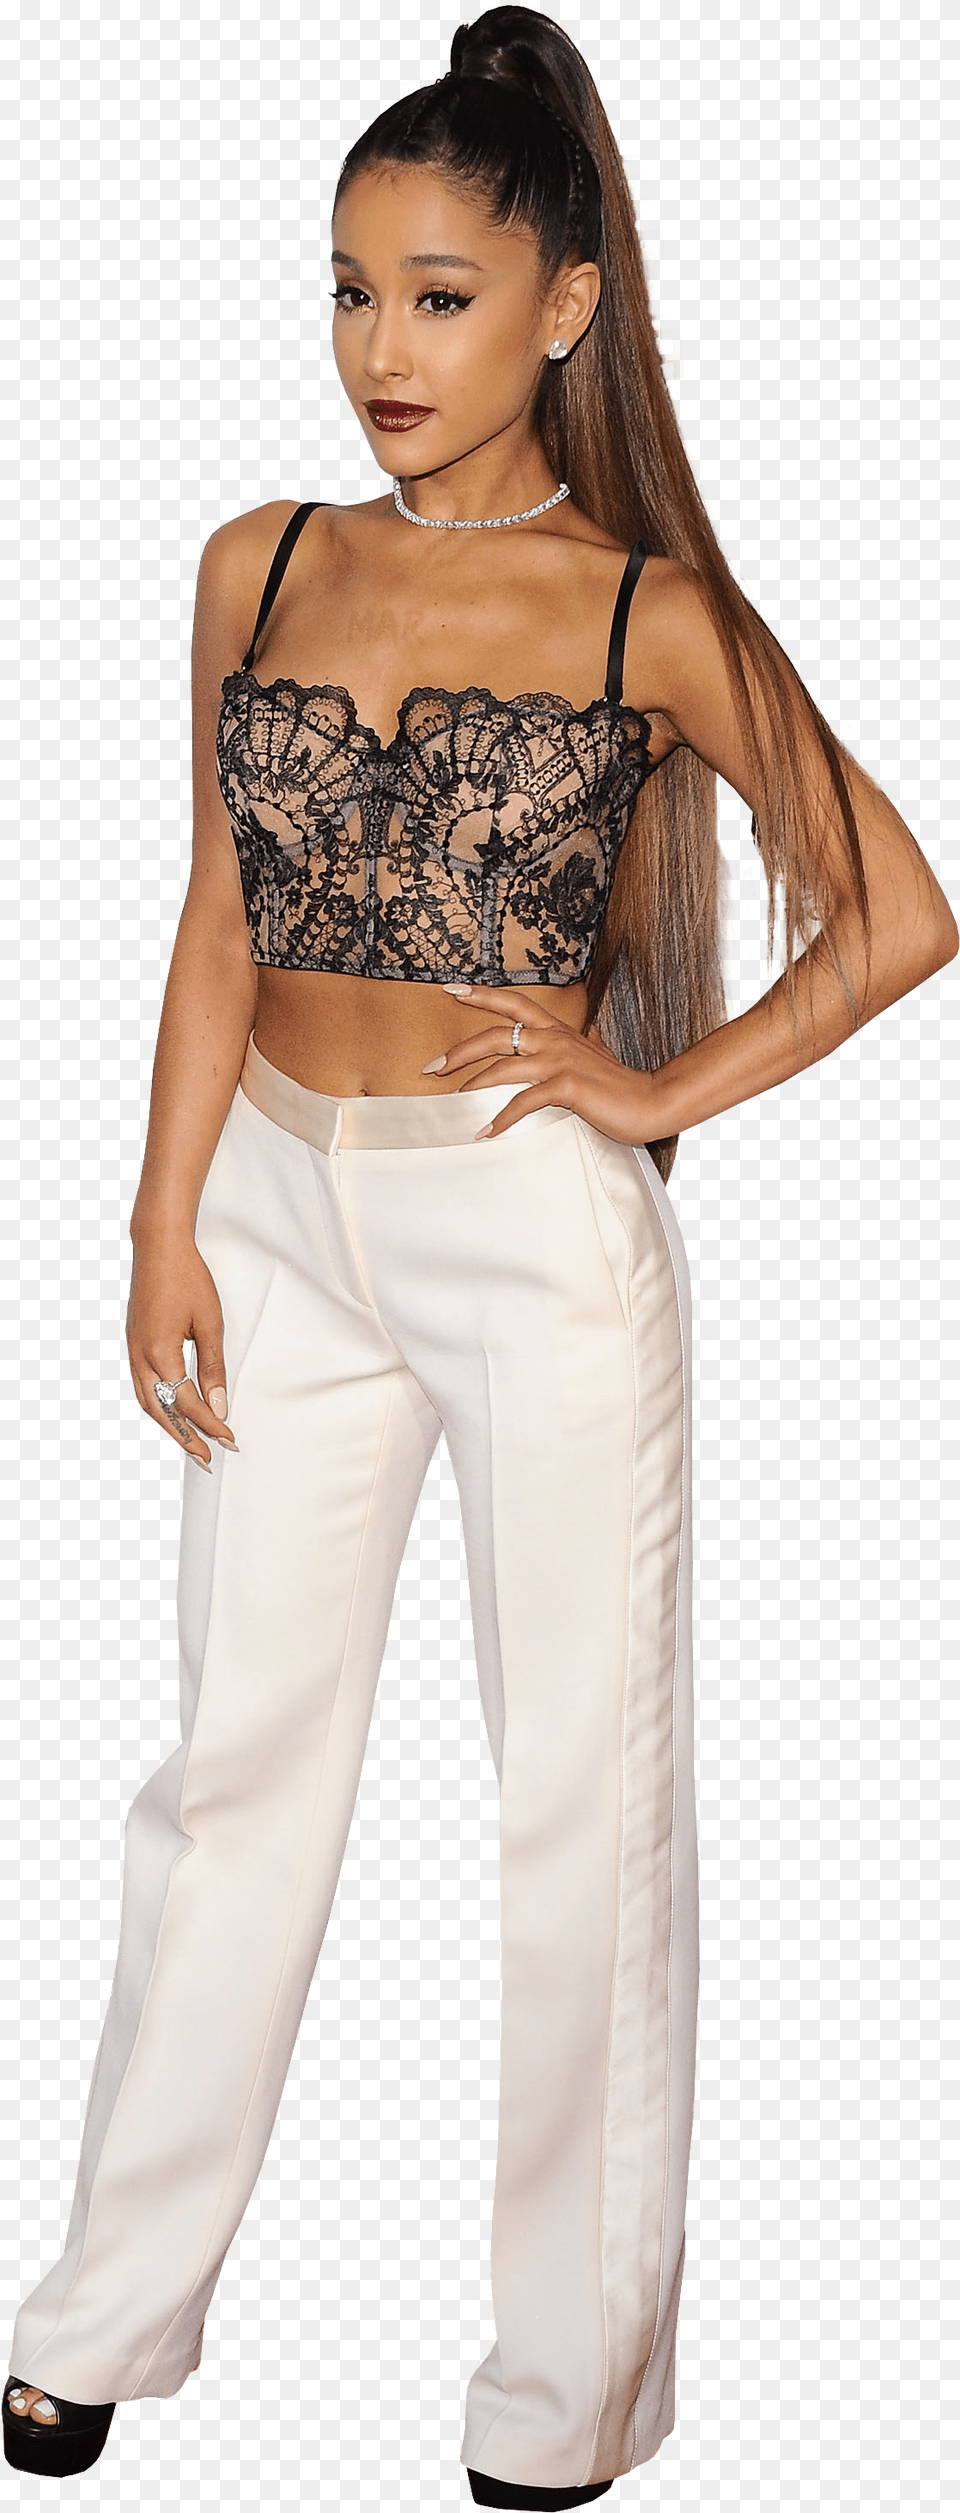 Download Ariana Grande In White Trousers Image For Ariana Grande White Trousers, Formal Wear, Clothing, Pants, Blouse Png